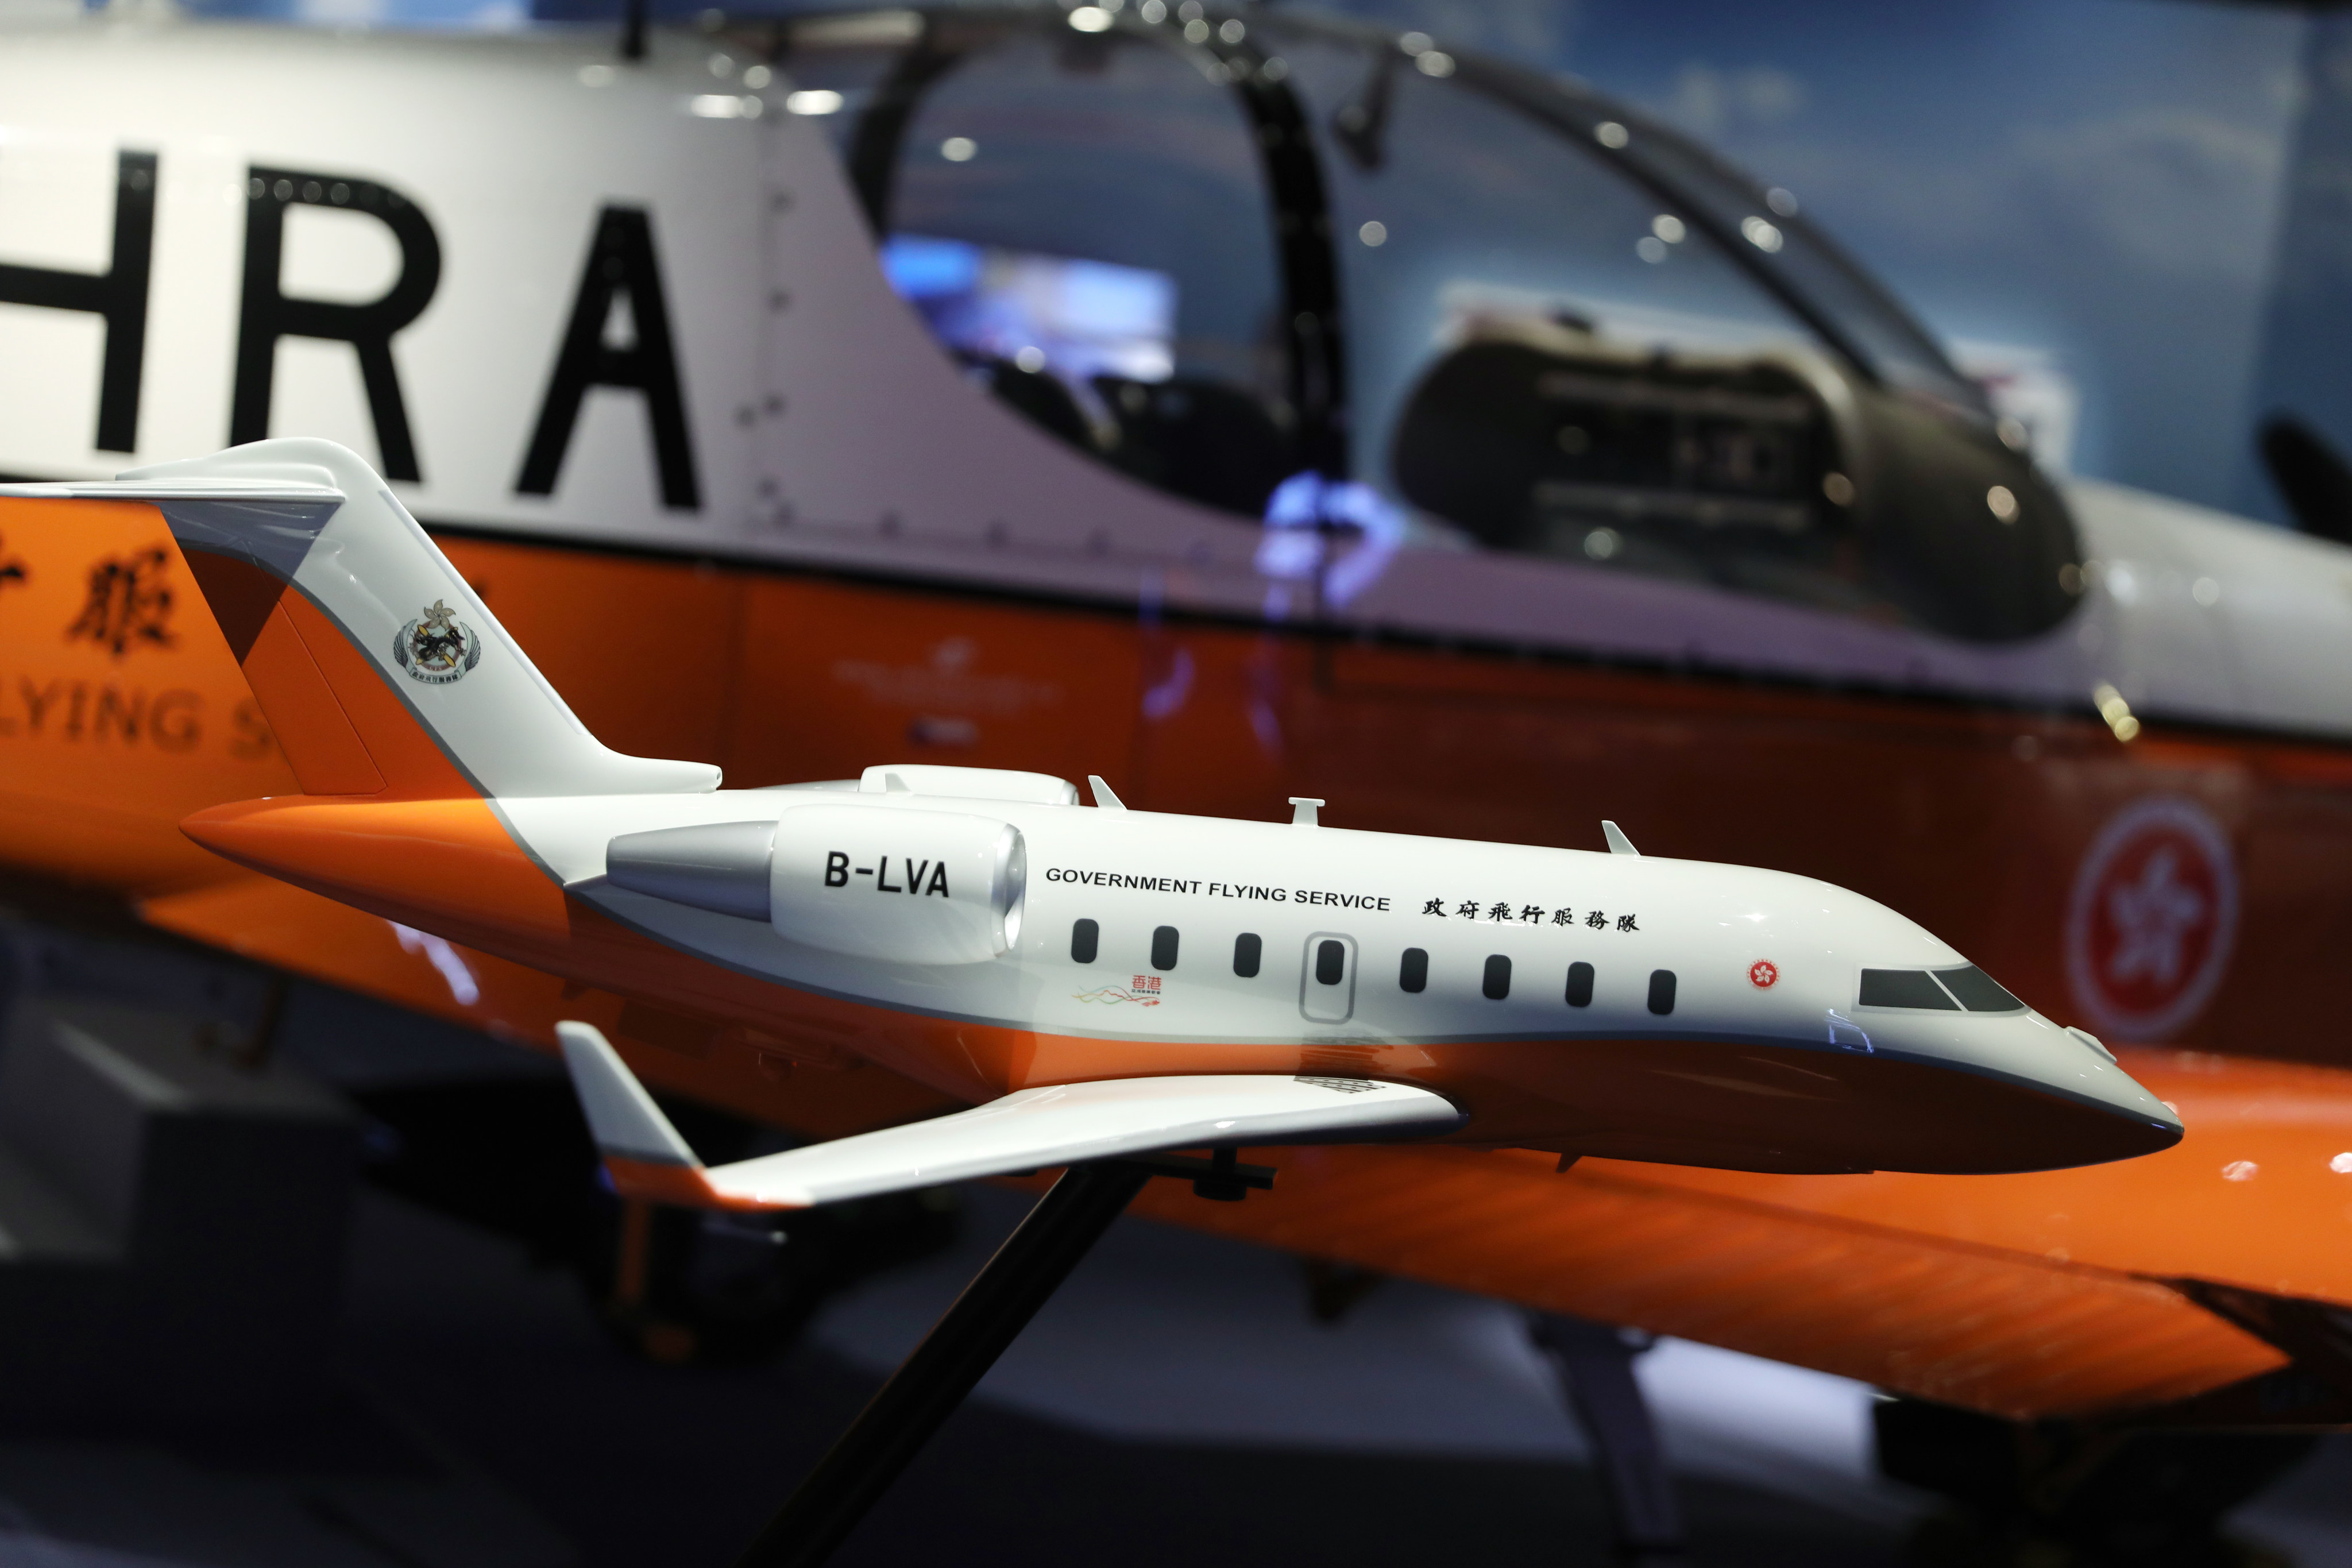 A model of the Challenger 605, the plane in which a box of condoms was discovered. Photo: Sam Tsang